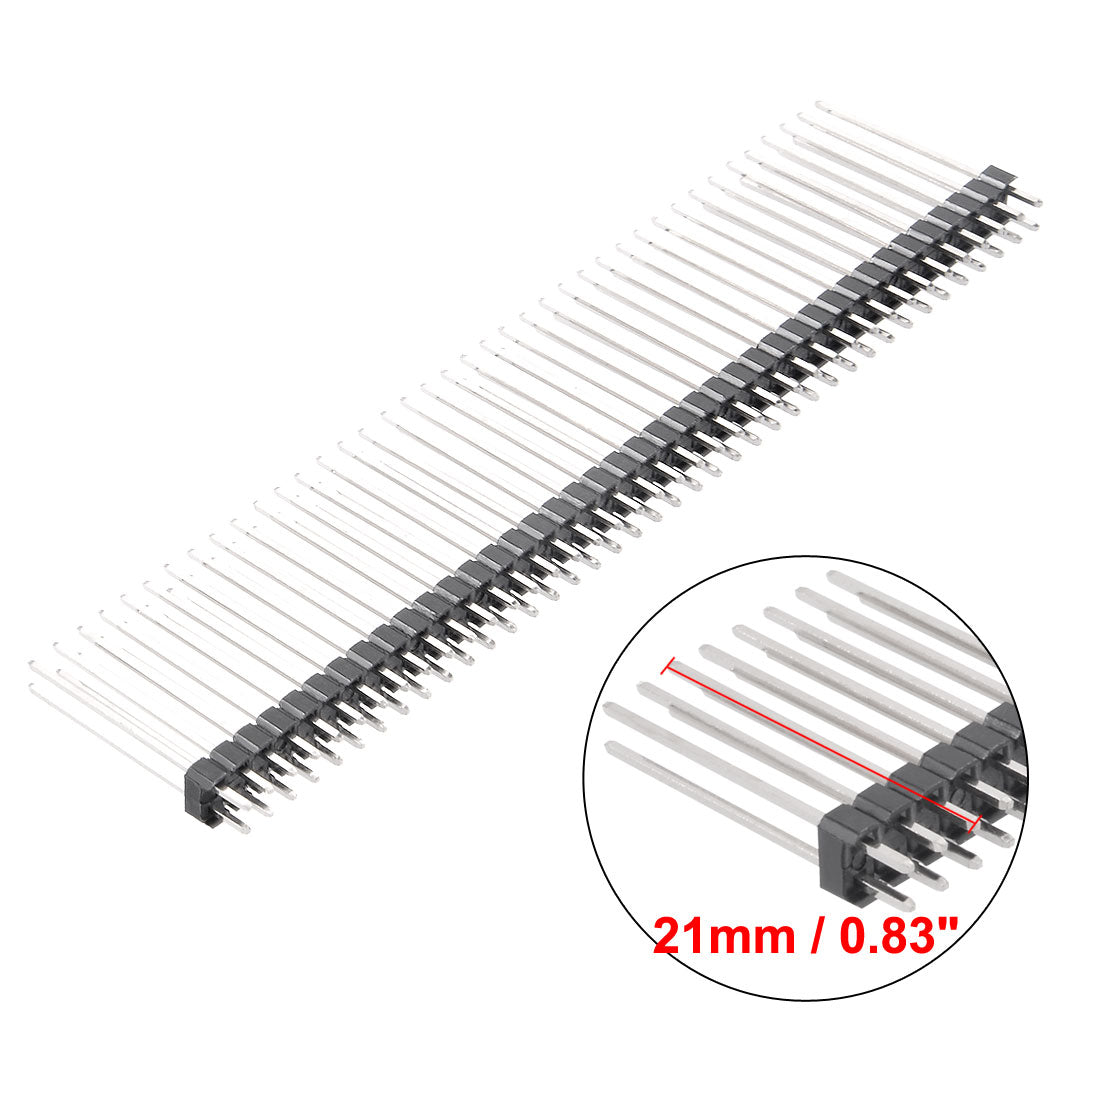 uxcell Uxcell 10Pcs 2.54mm Pitch 40-Pin 21mm Length Double Row Straight Connector Pin Header Strip for Arduino Prototype Shield